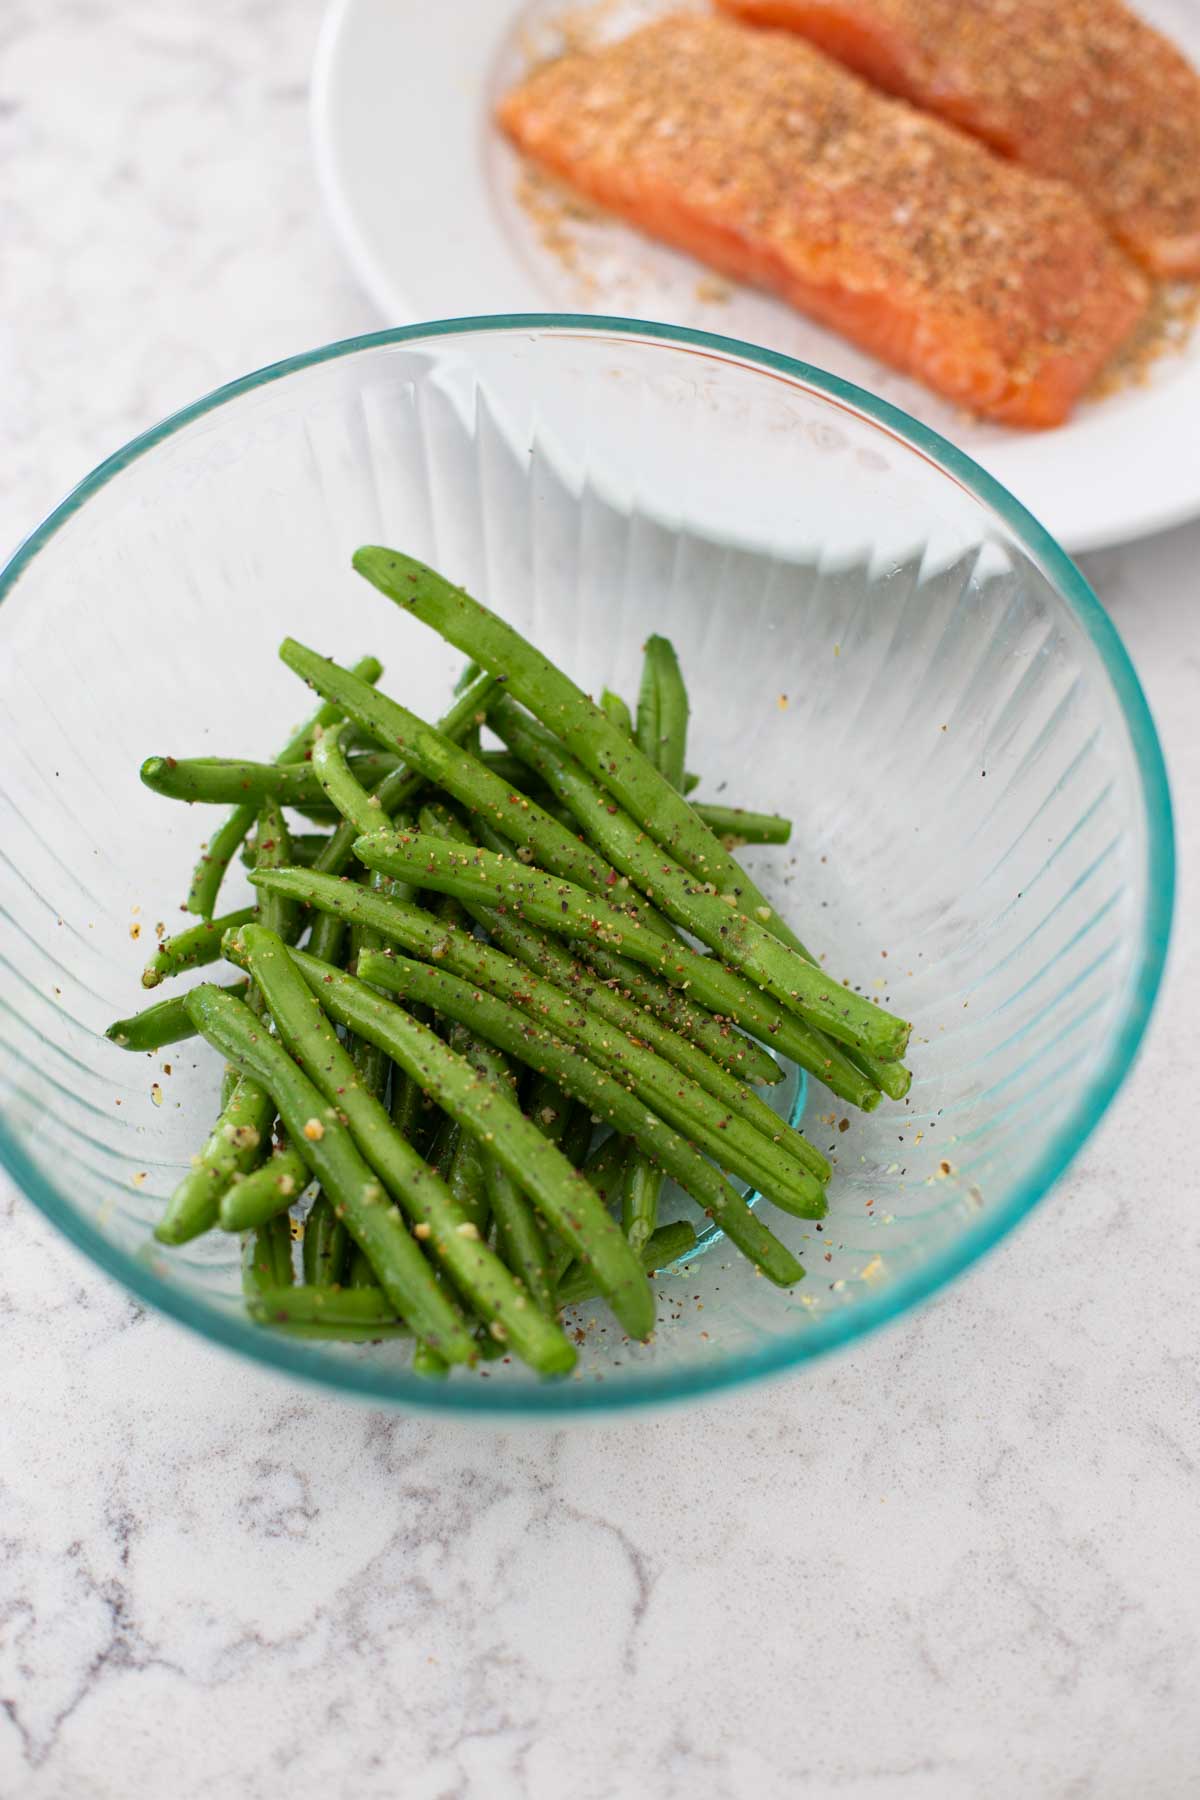 A bowl of green beans has been drizzled with olive oil and seasonings.